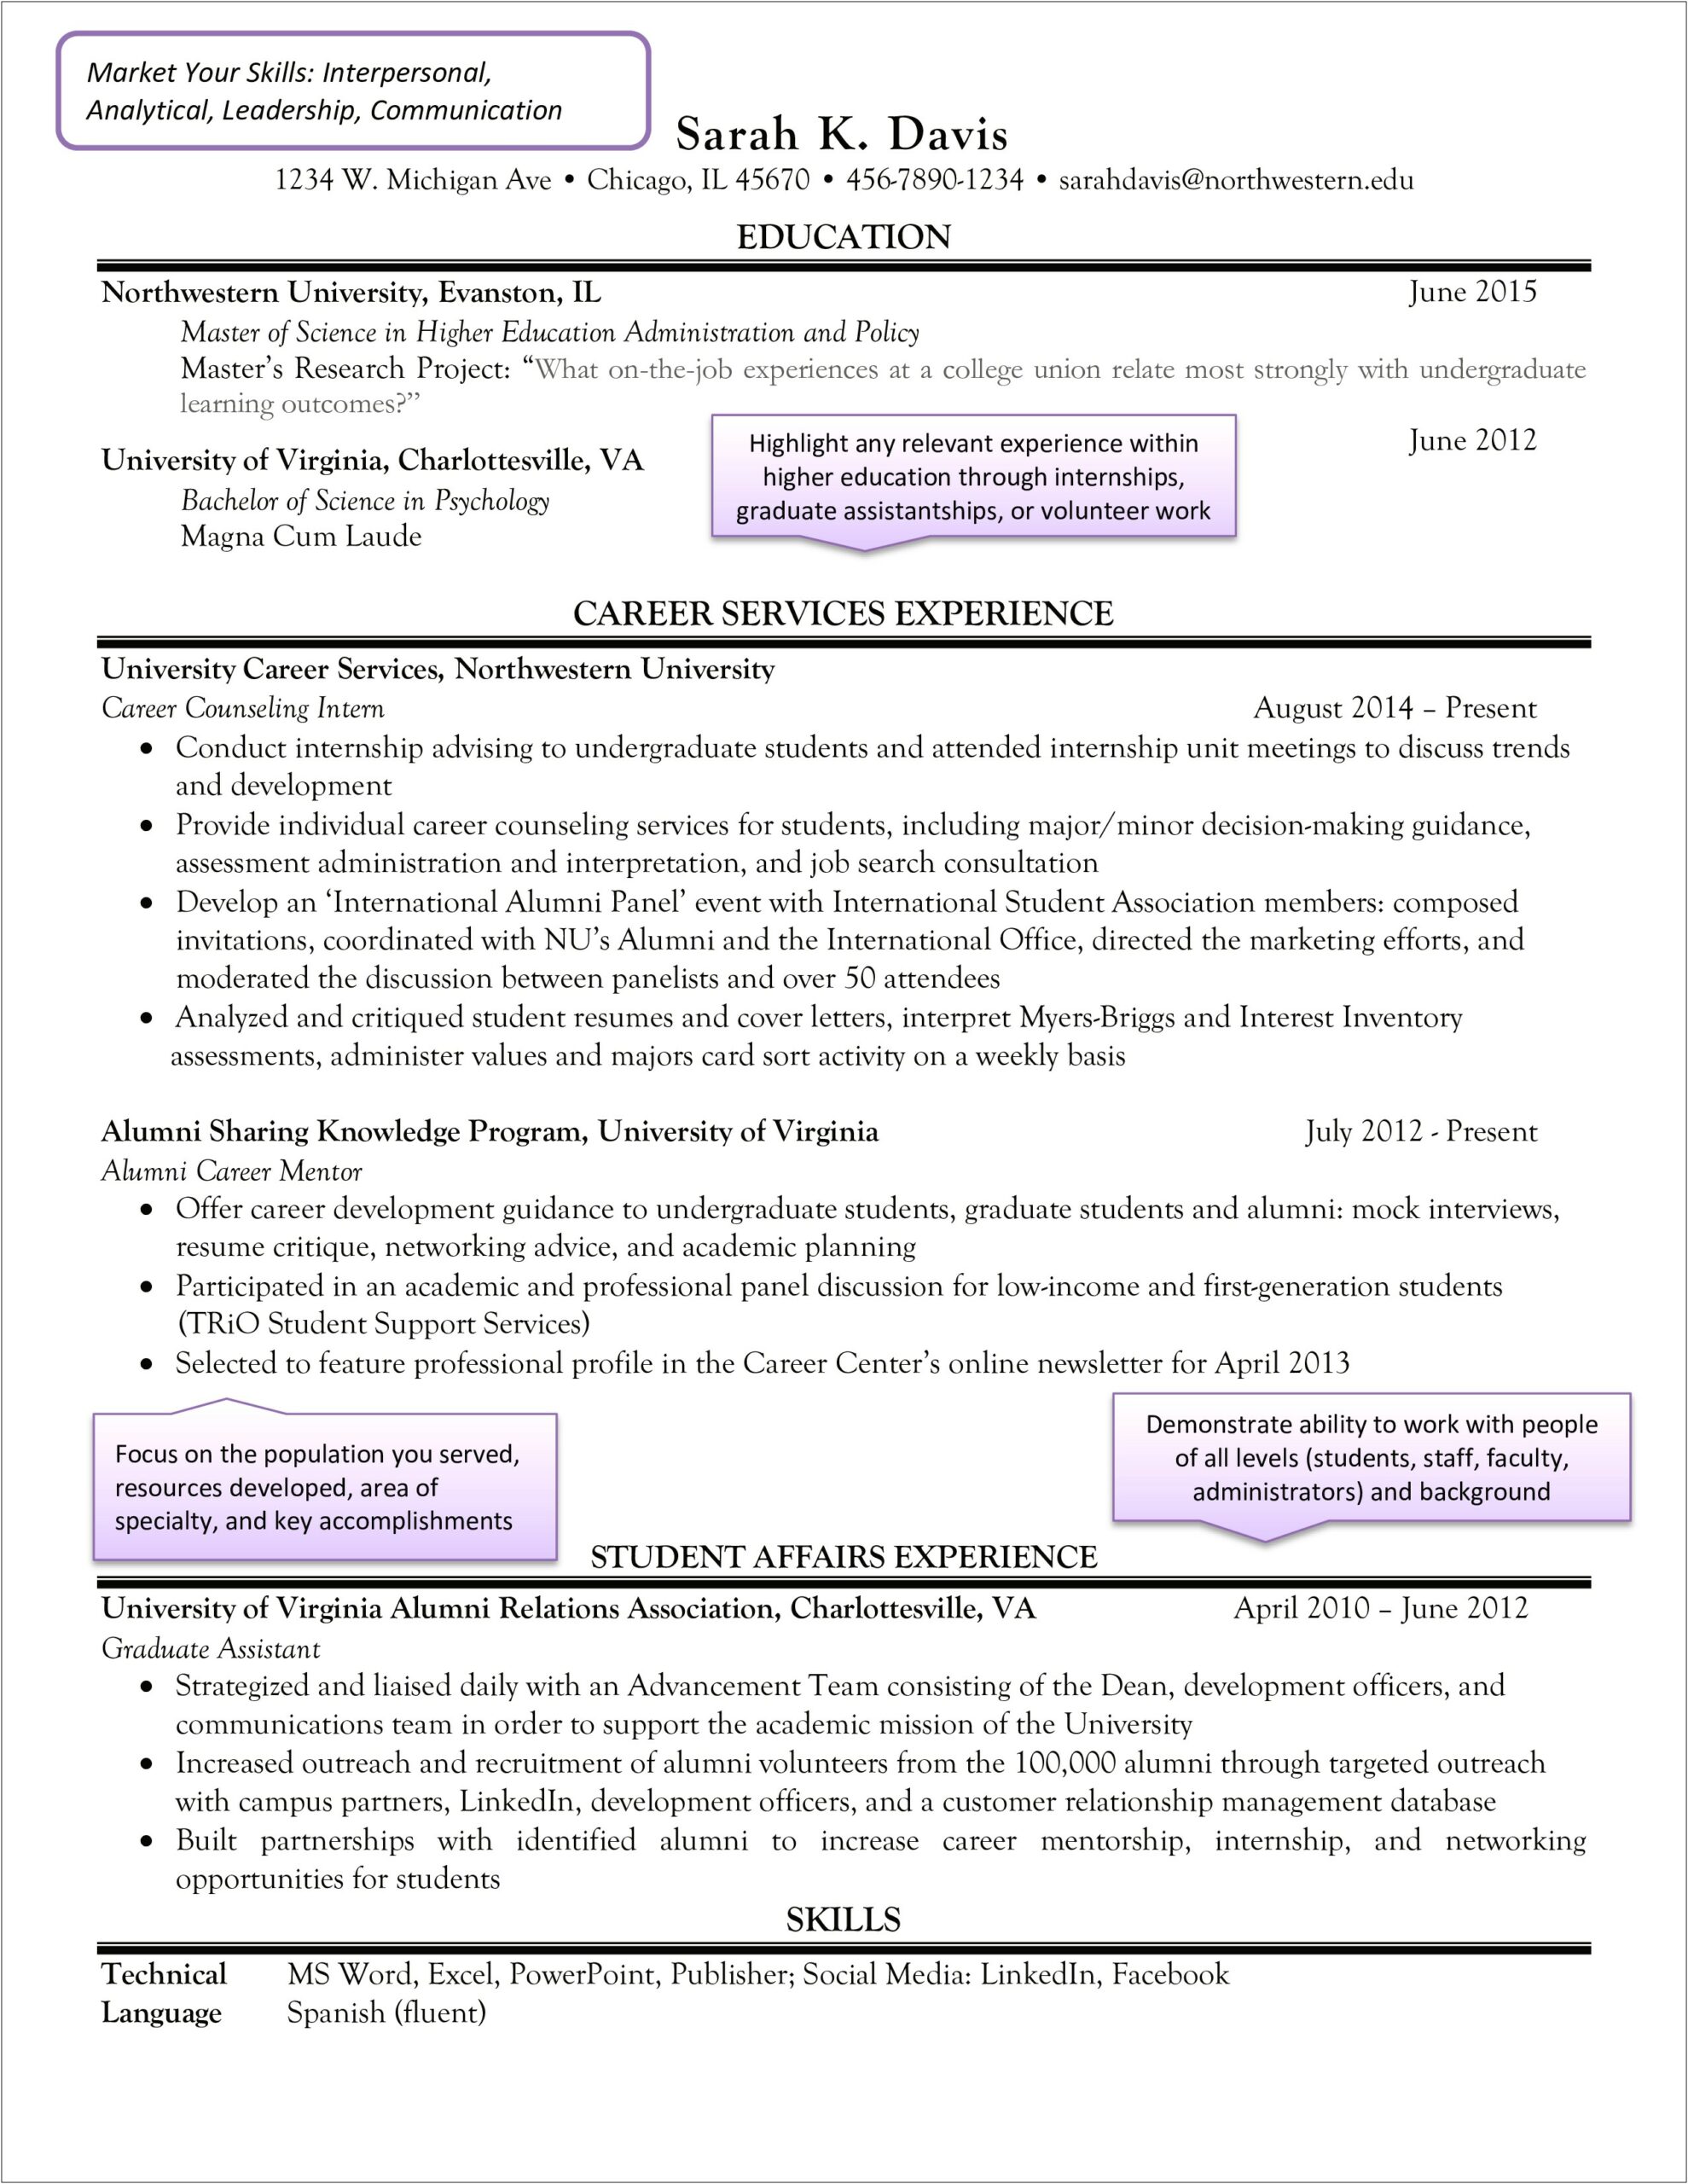 School Of Public Policy Education Resume Guides